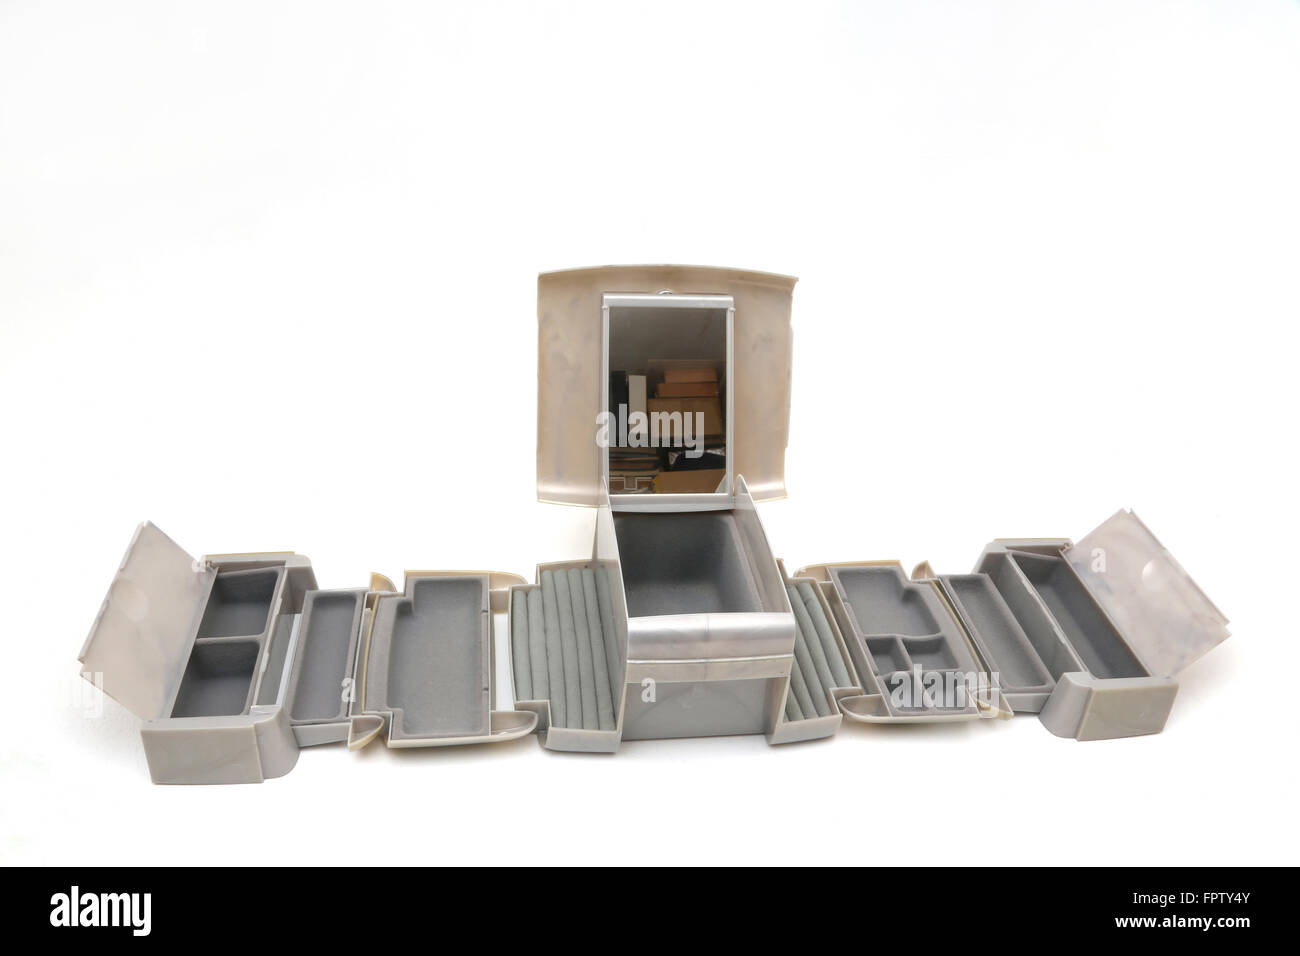 Extendible Jewellery Box Fully Extended Showing Compartments And Mirror Stock Photo